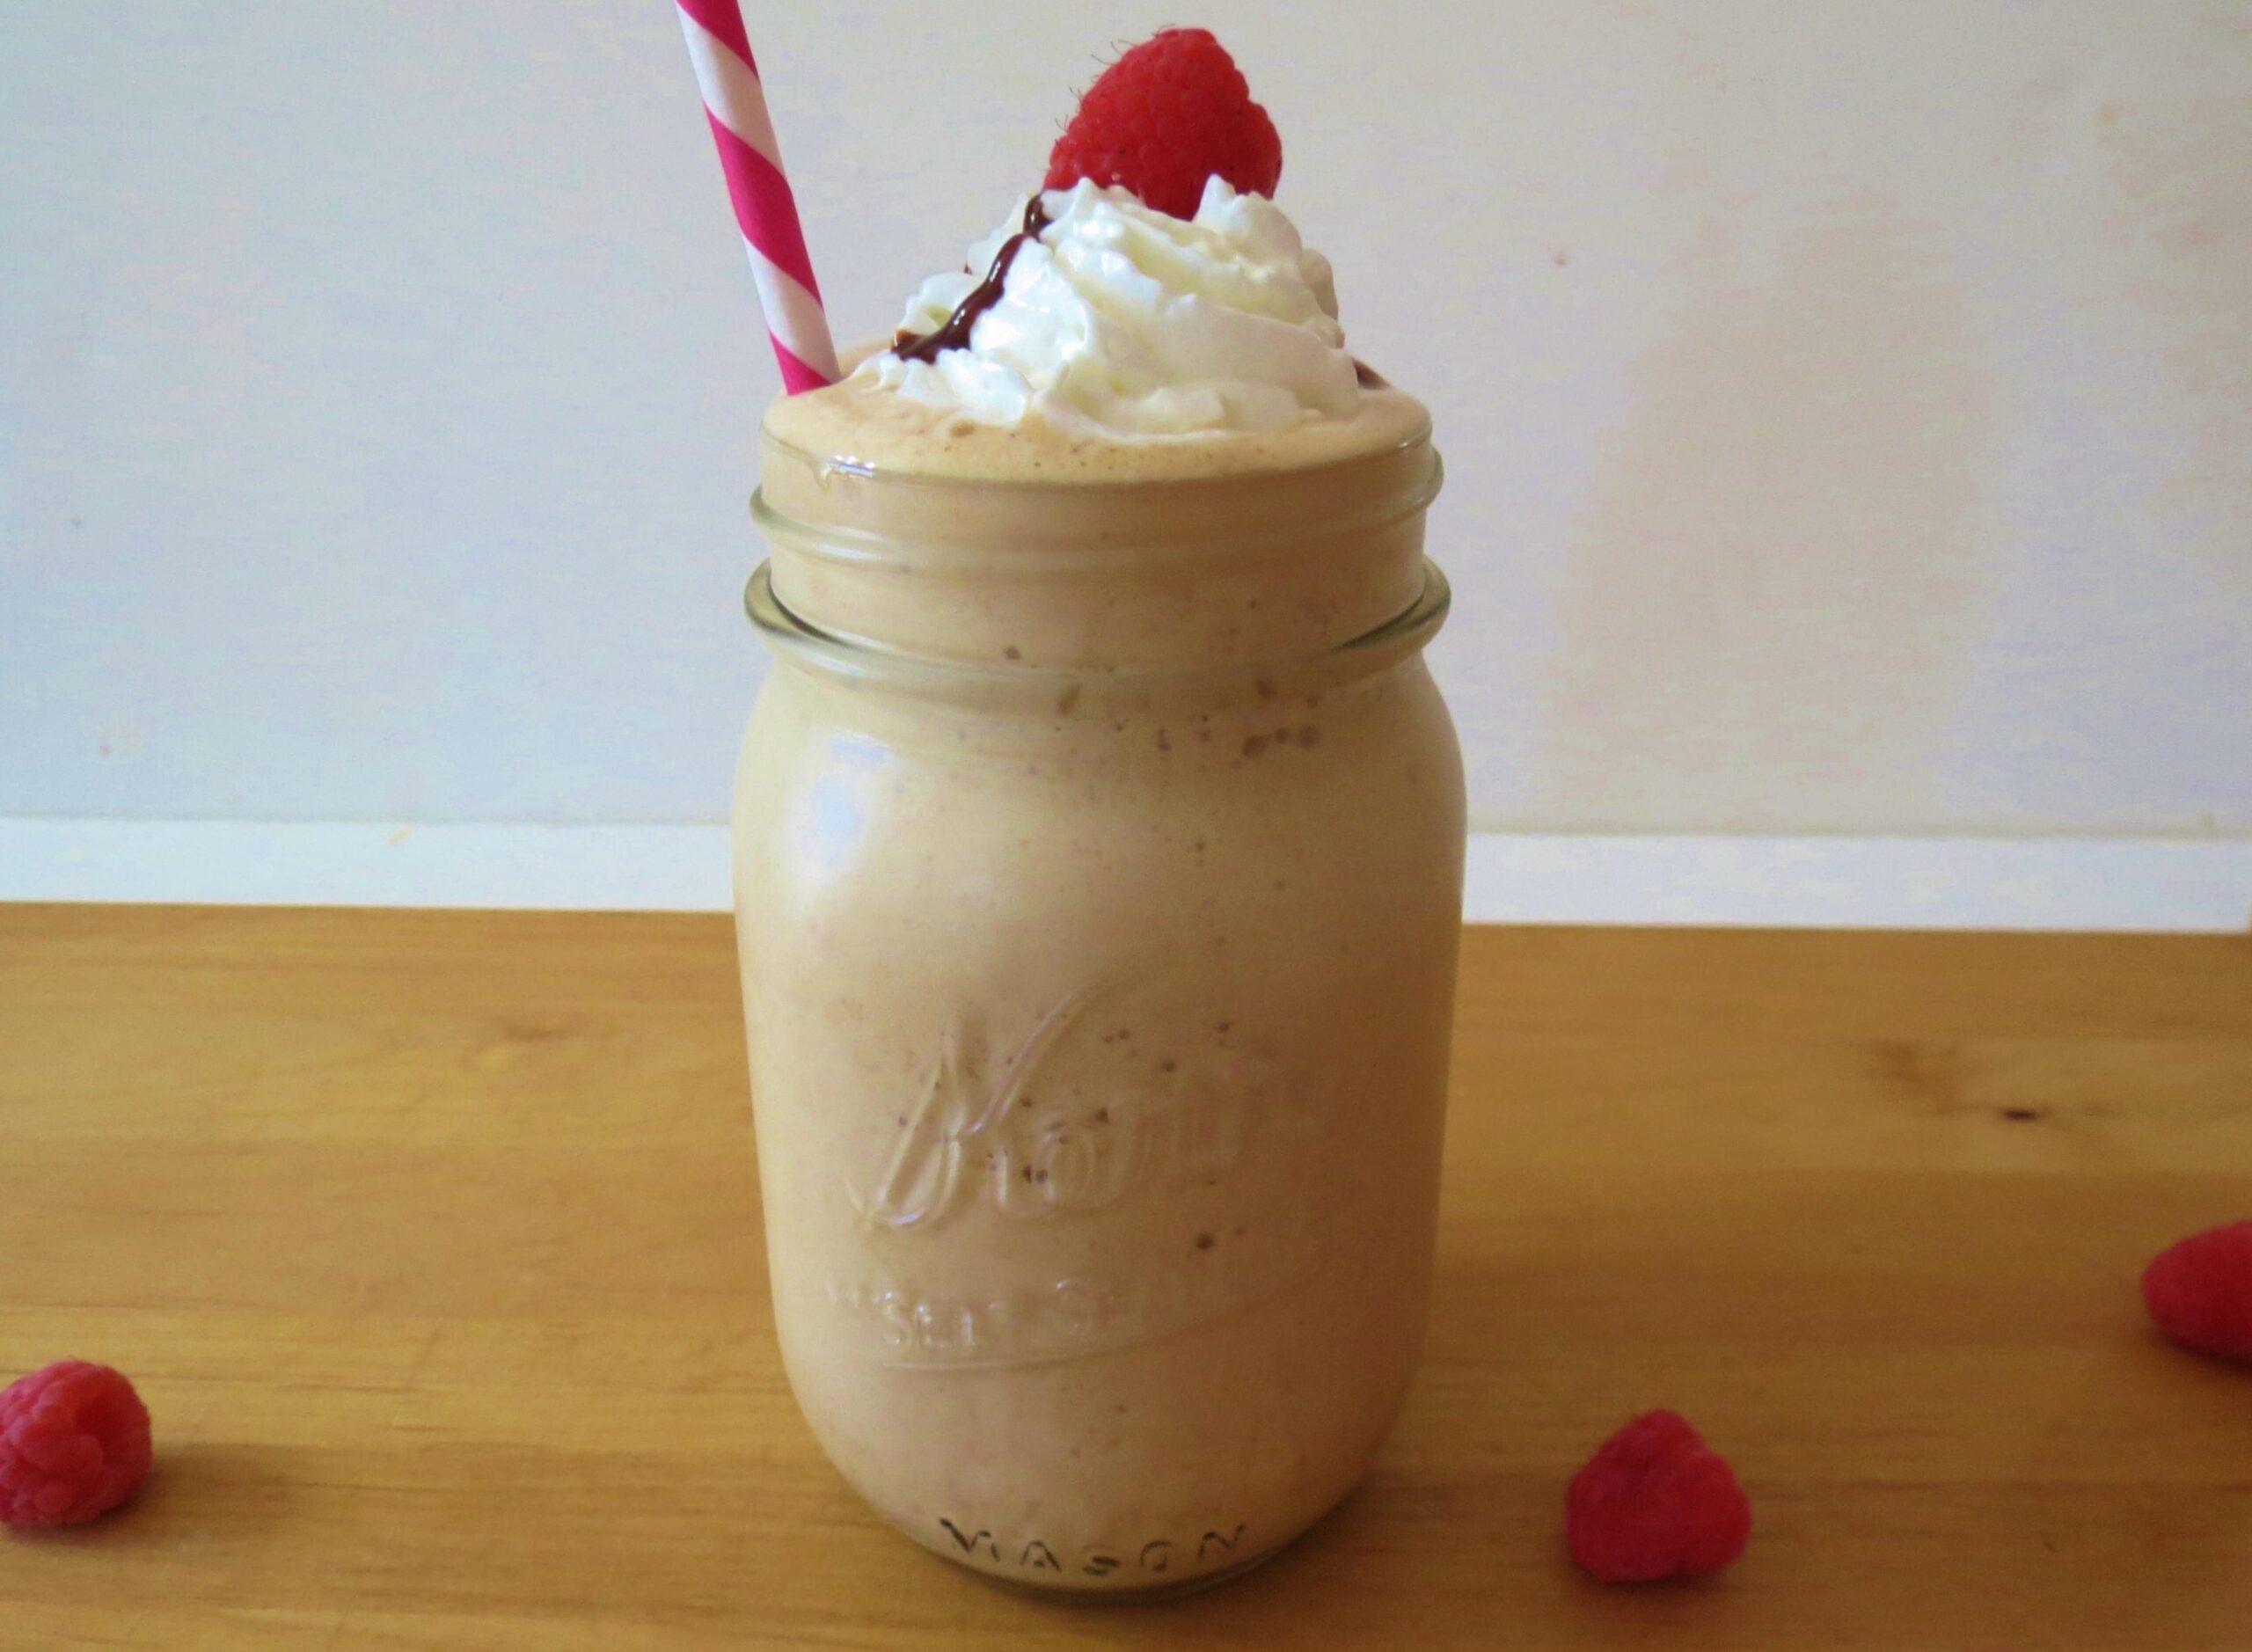  Sip on summer with this irresistible raspberry-coffee frappe.